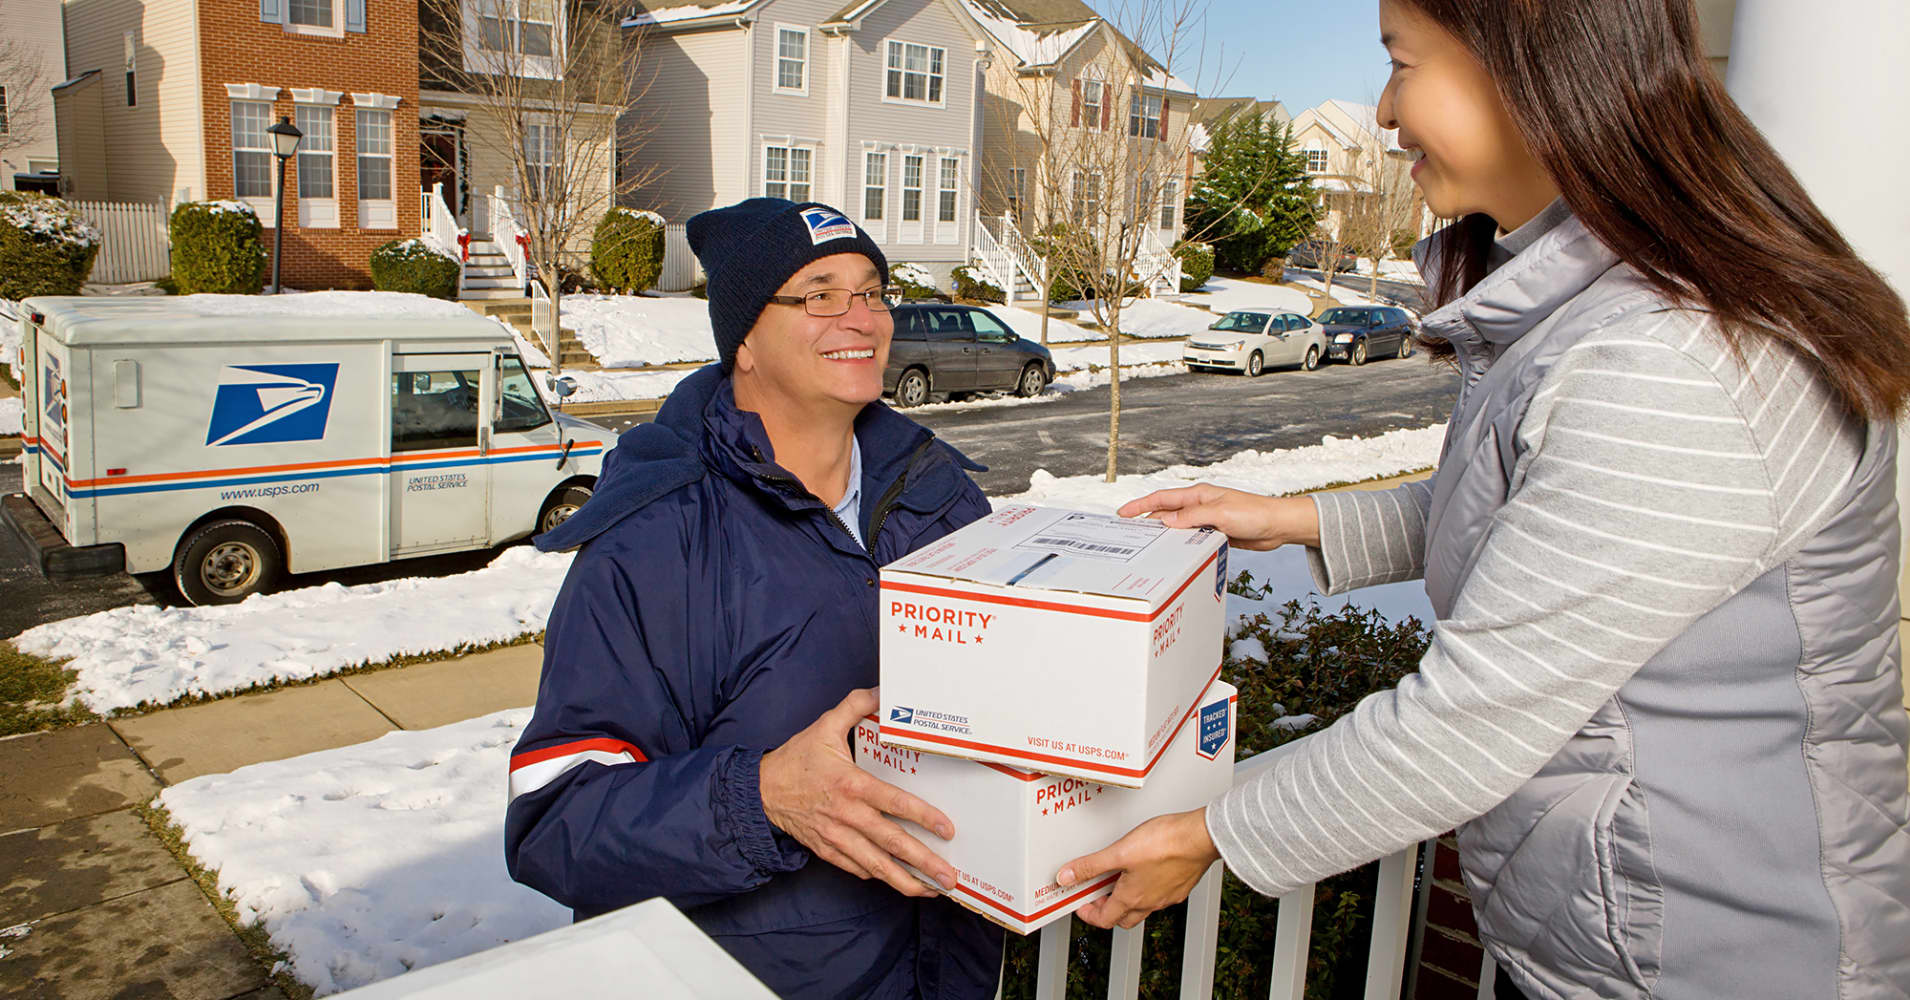 Postal service wants to deliver your holiday items on time